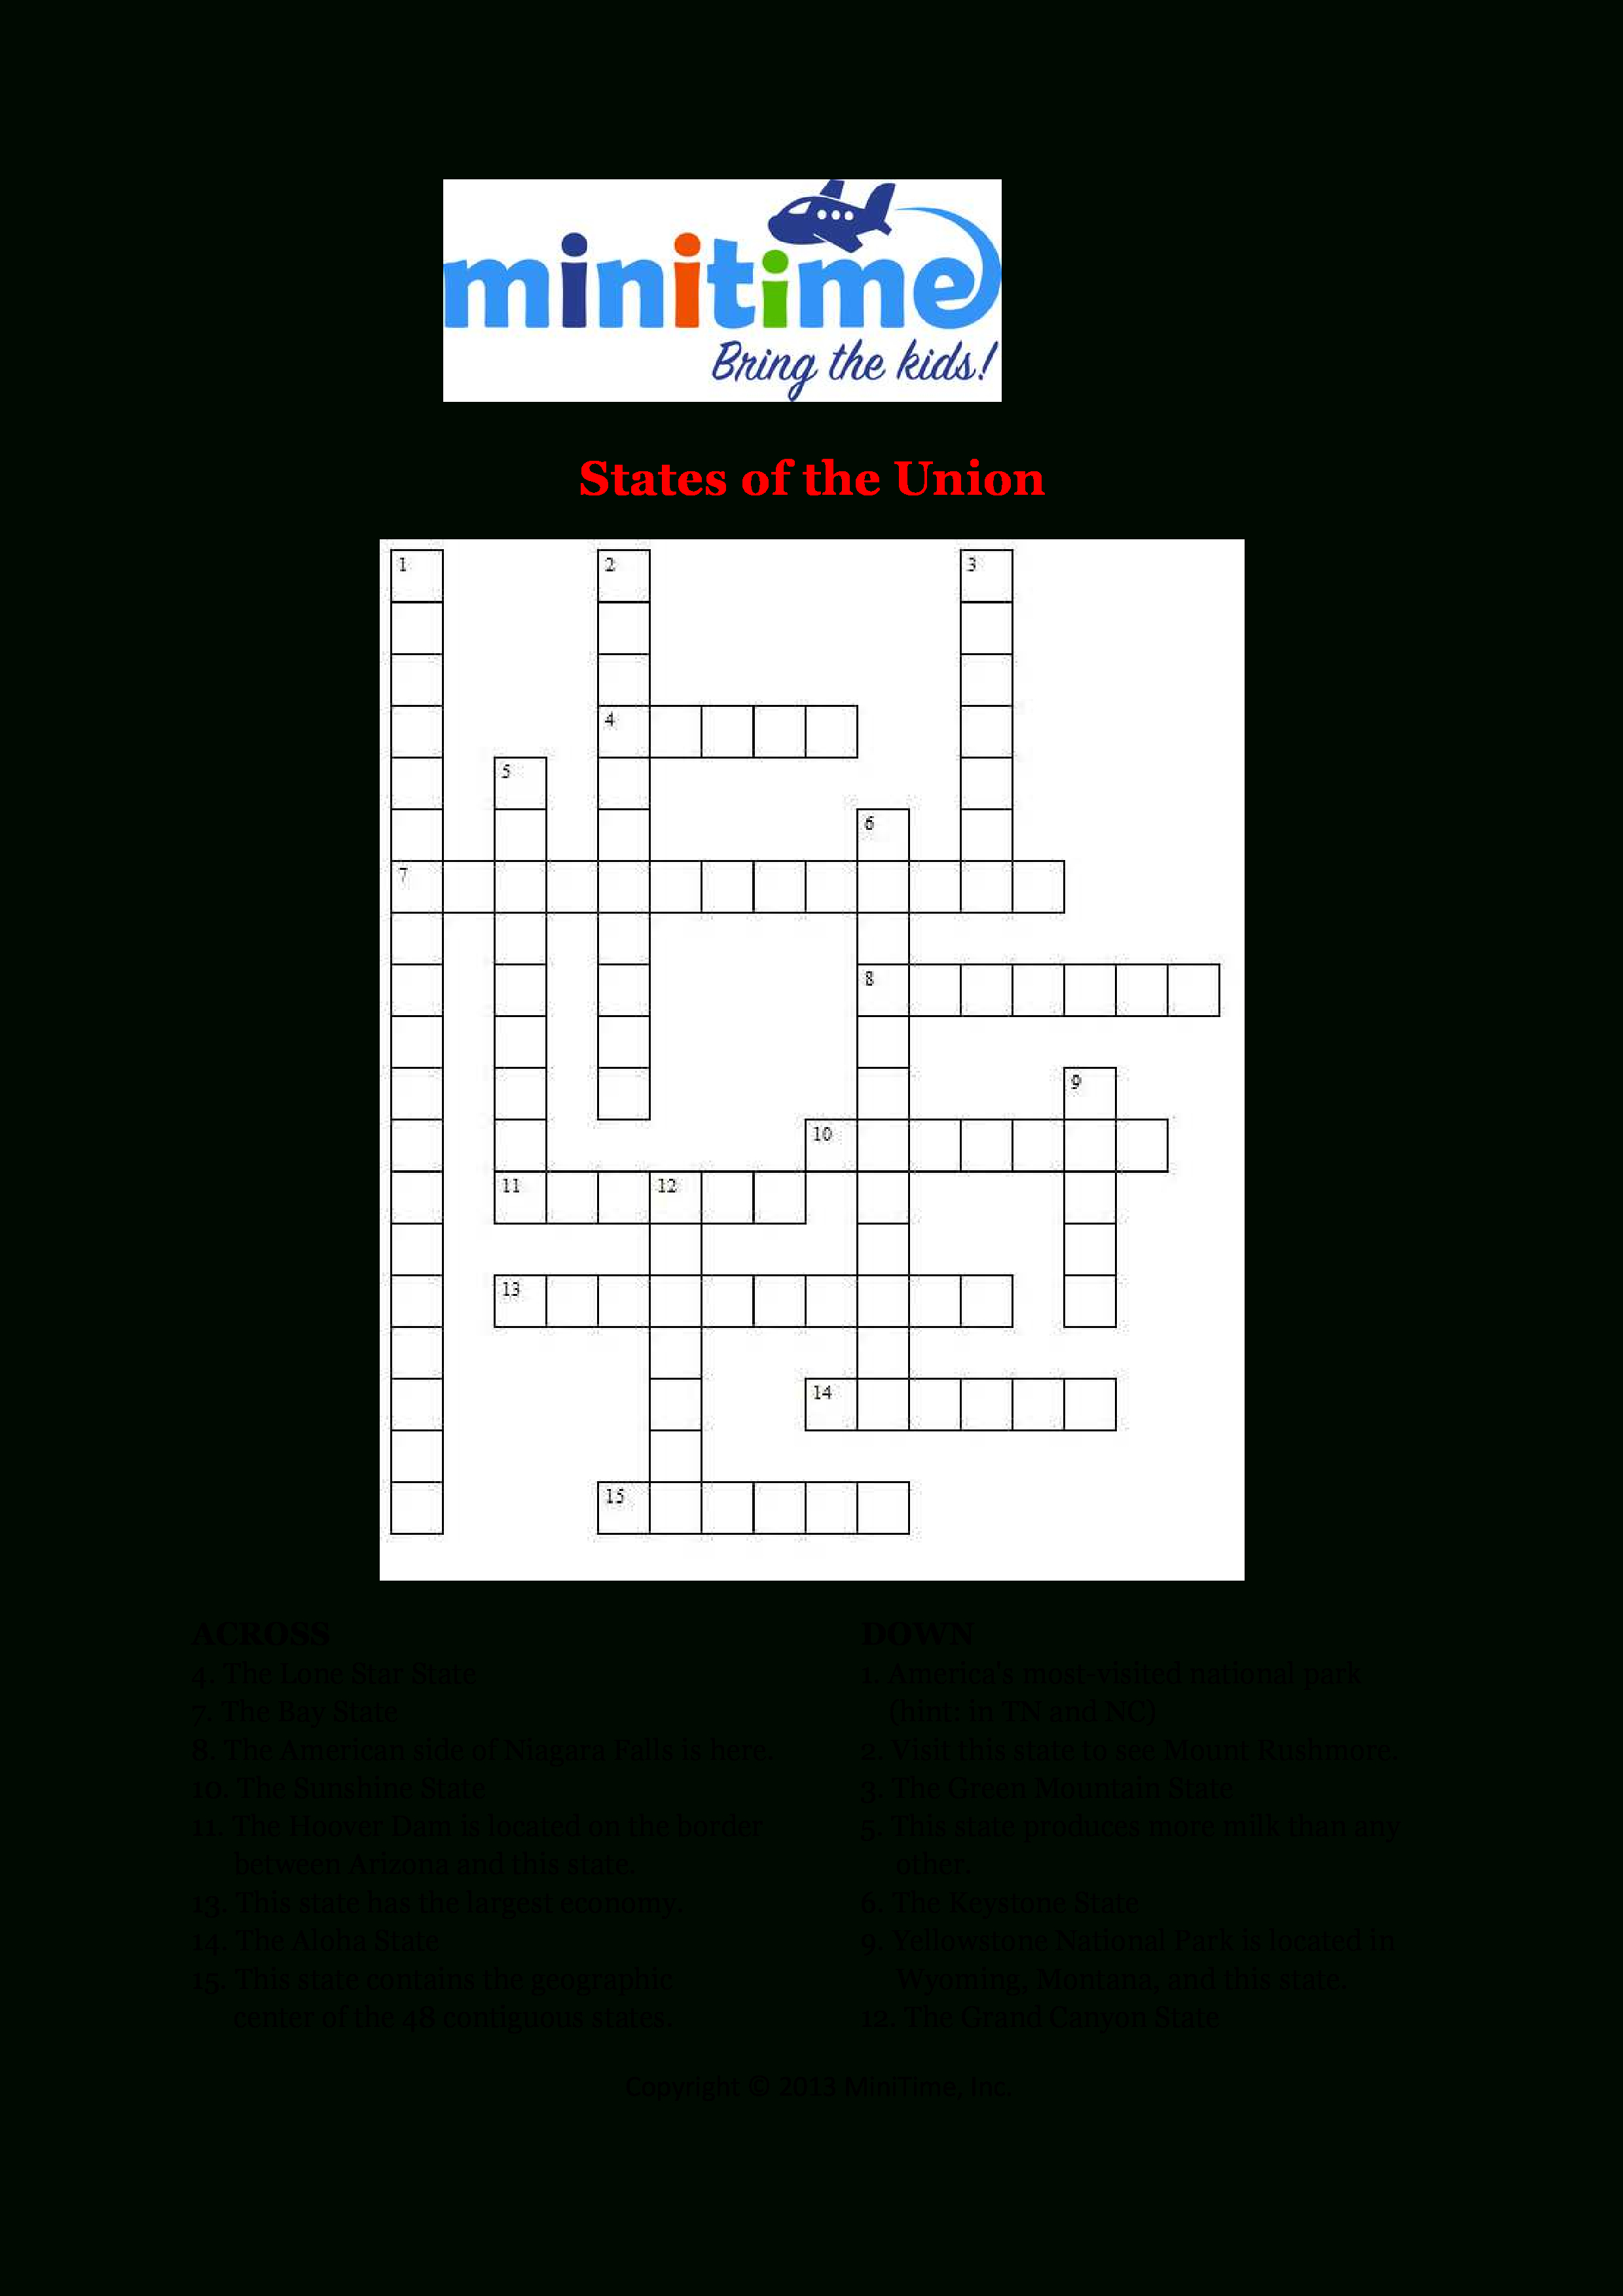 Us States Fun Facts Crossword Puzzles | Free Printable Travel - Disney Crossword Puzzles Printable